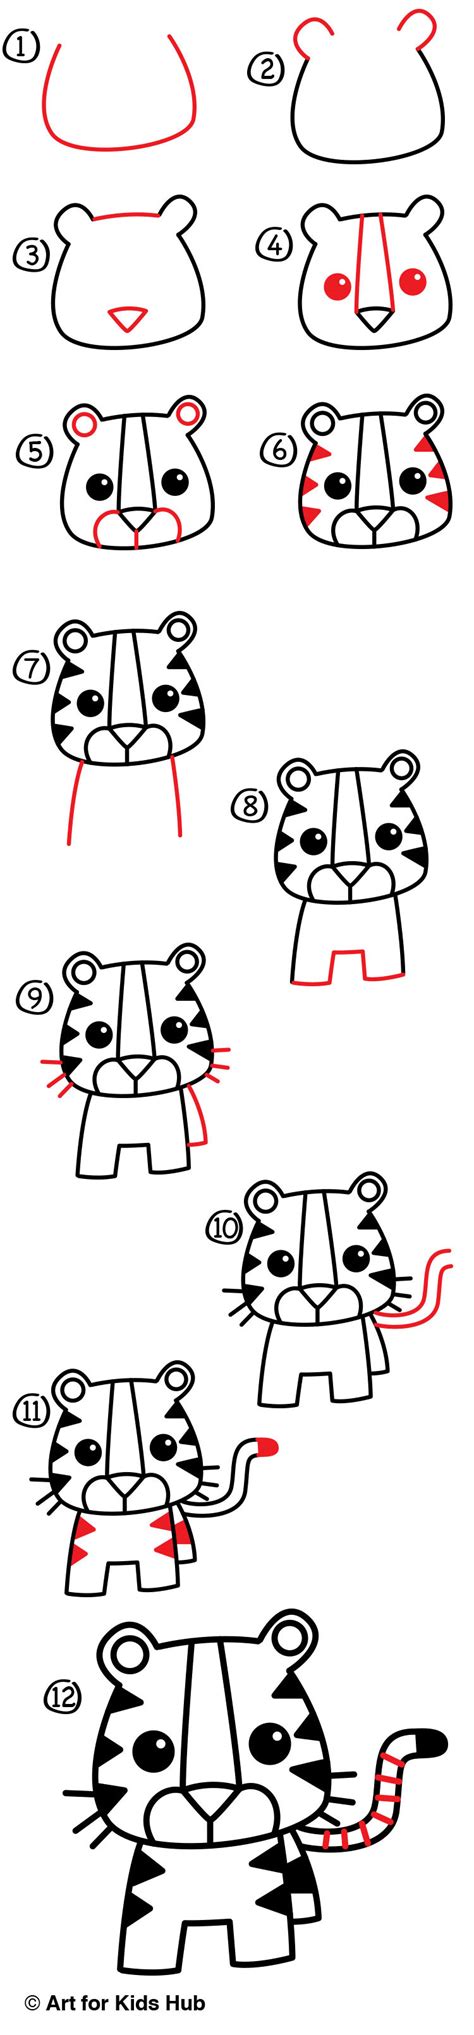 How to draw easy animals step by step image guide hat you spend some time studying the distinguishing characteristic of the animal like the trunk of. How To Draw A Cartoon Tiger - Art For Kids Hub